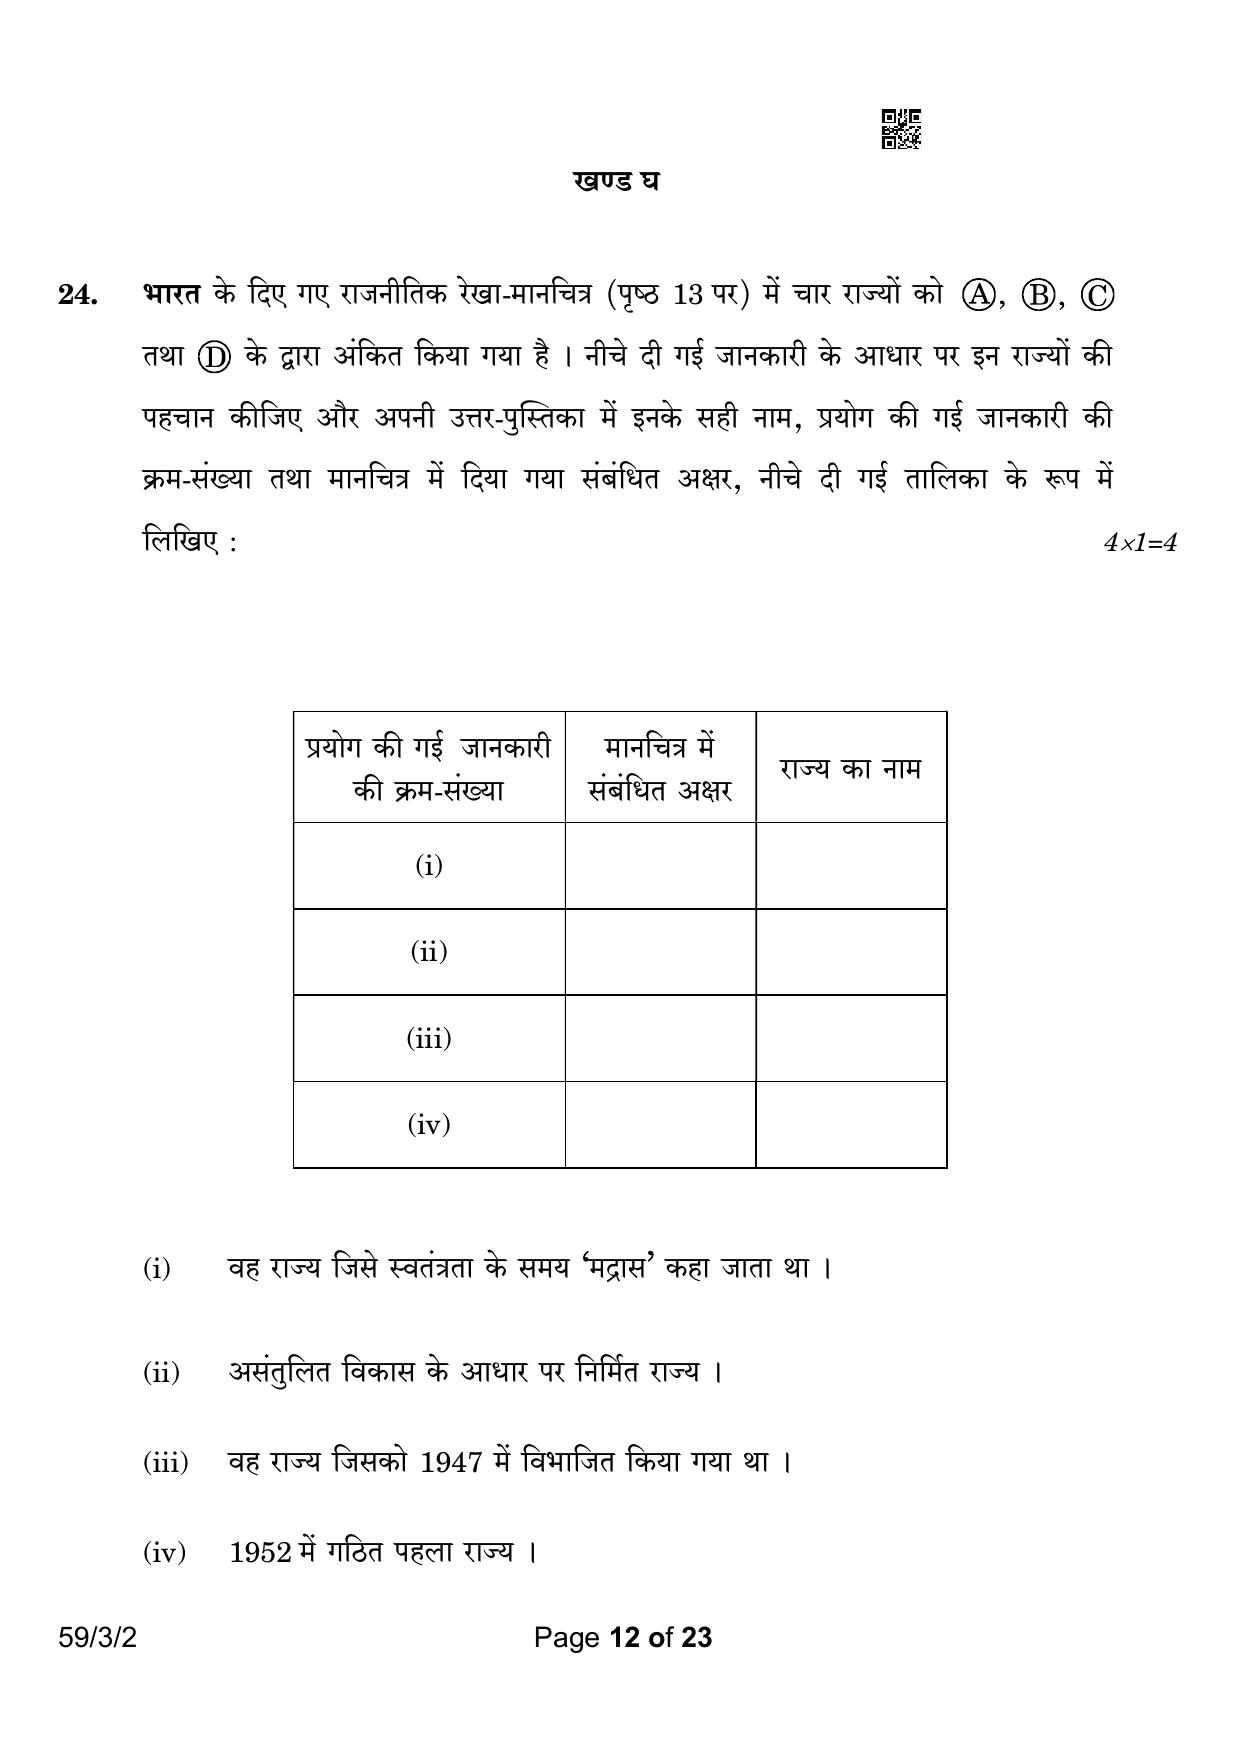 CBSE Class 12 59-3-2 Political Science 2023 Question Paper - Page 12